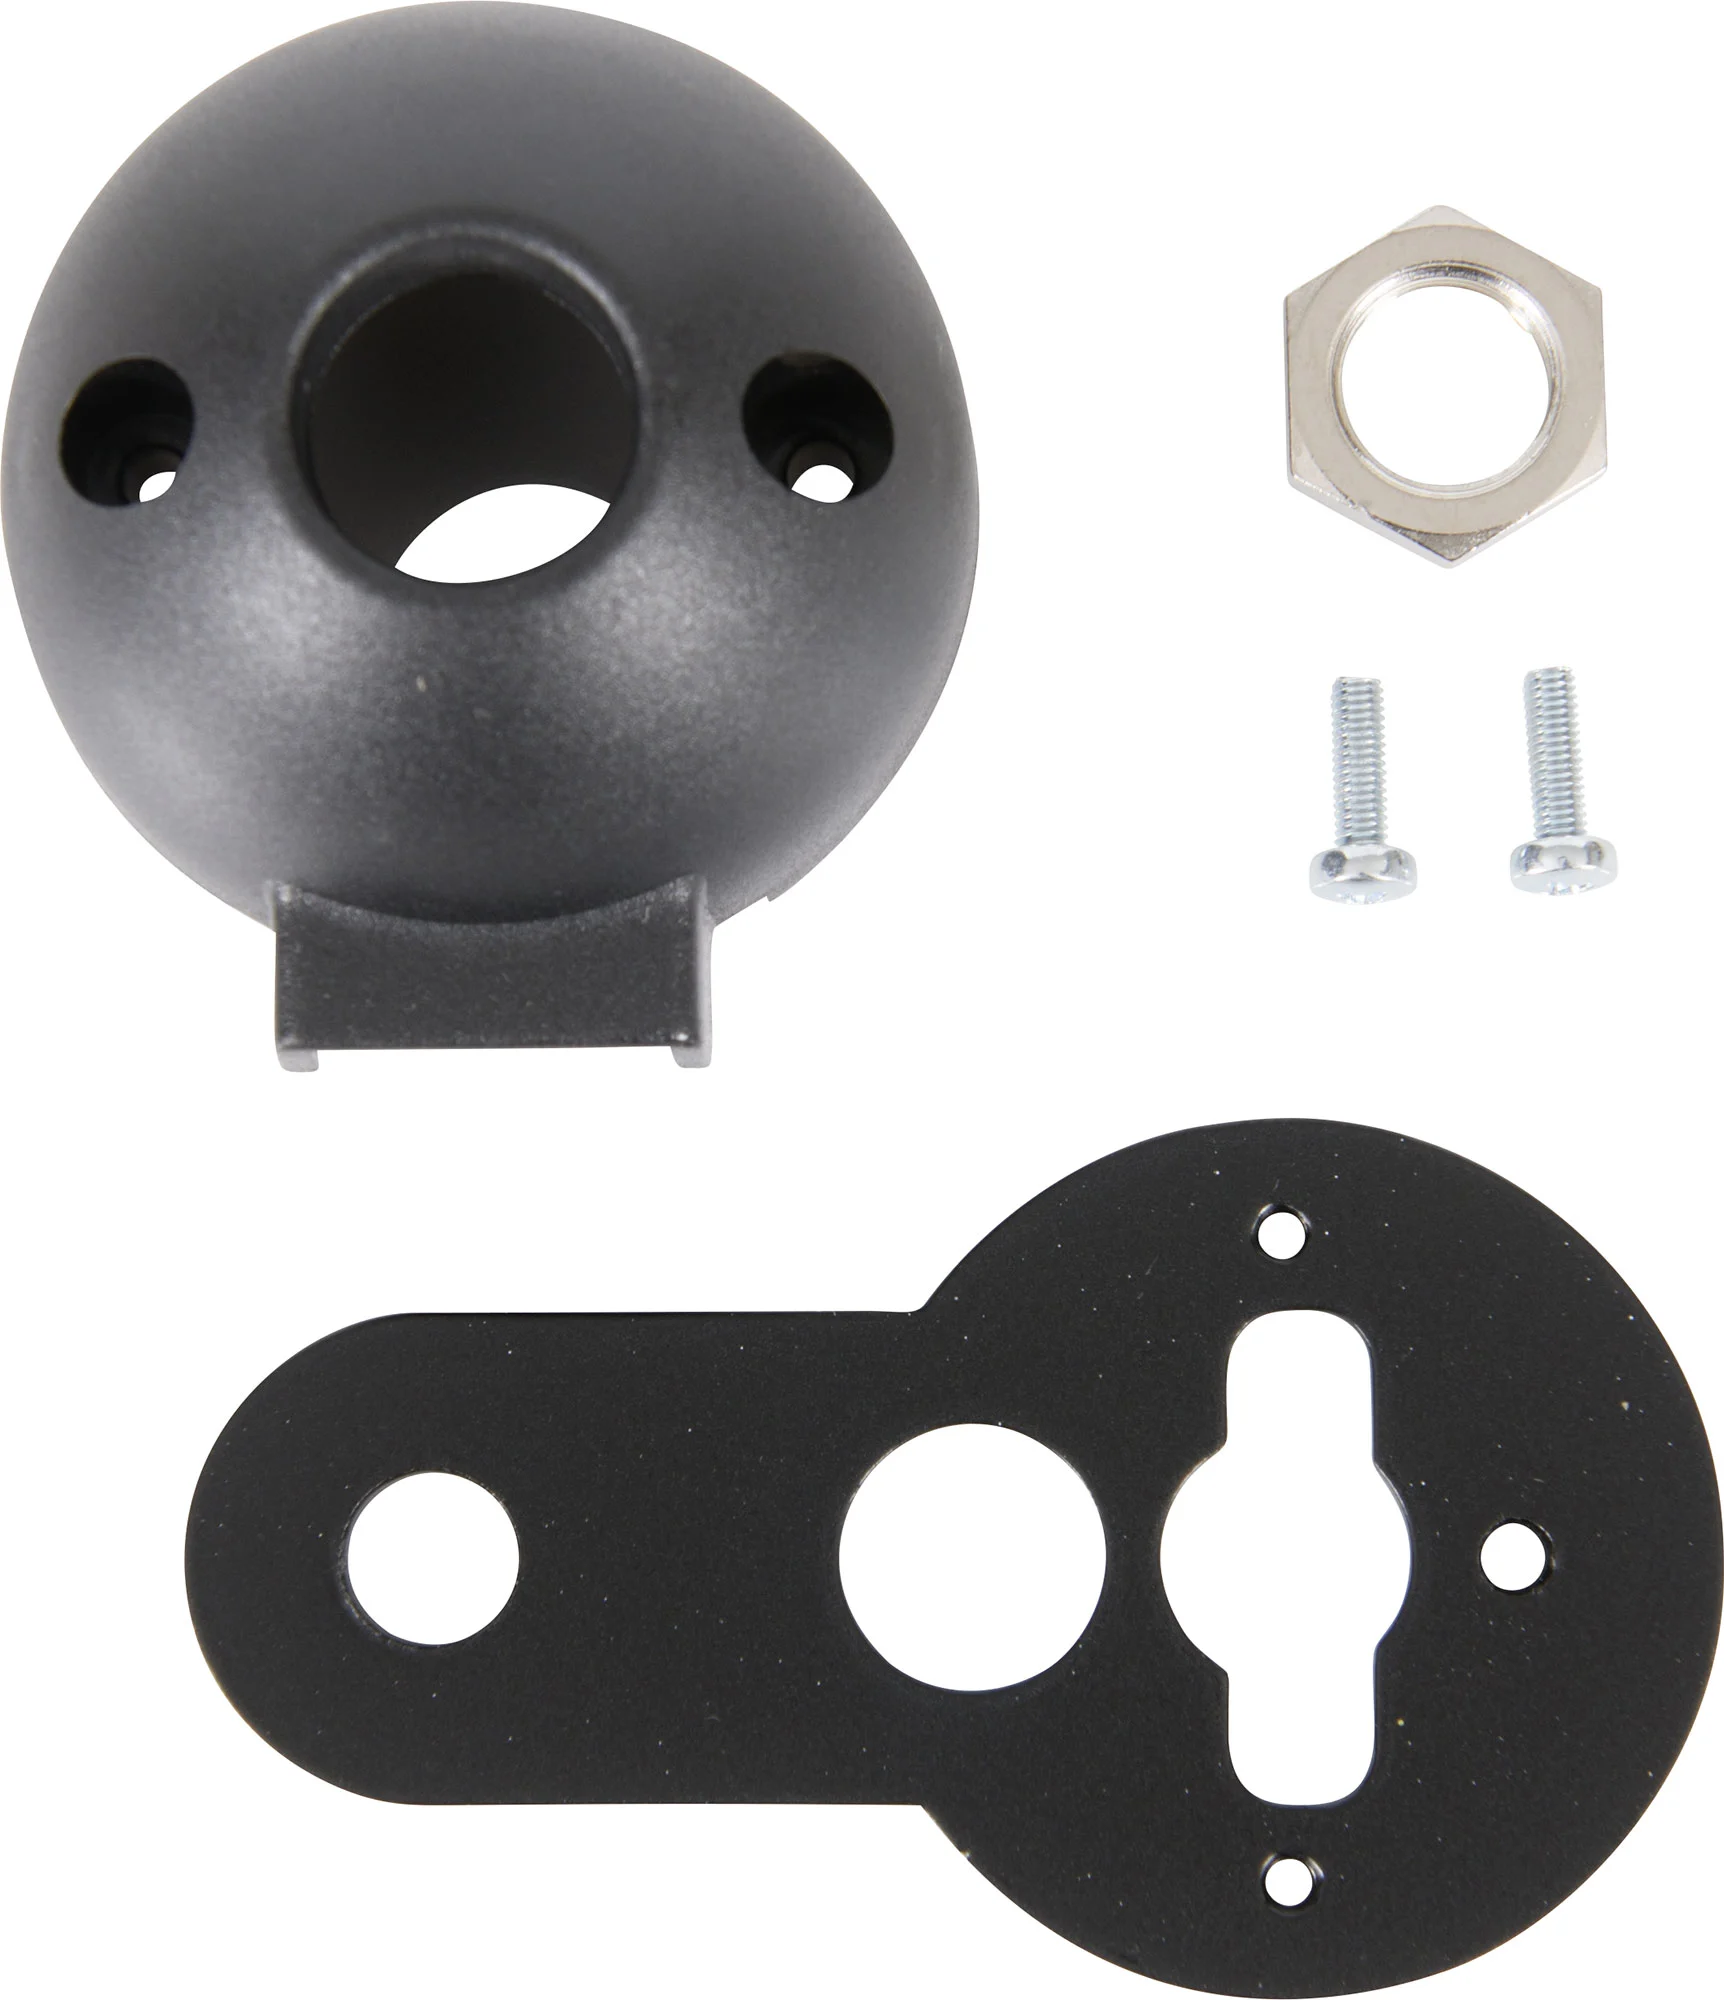 MOUNTING KIT FOR 48MM T&T